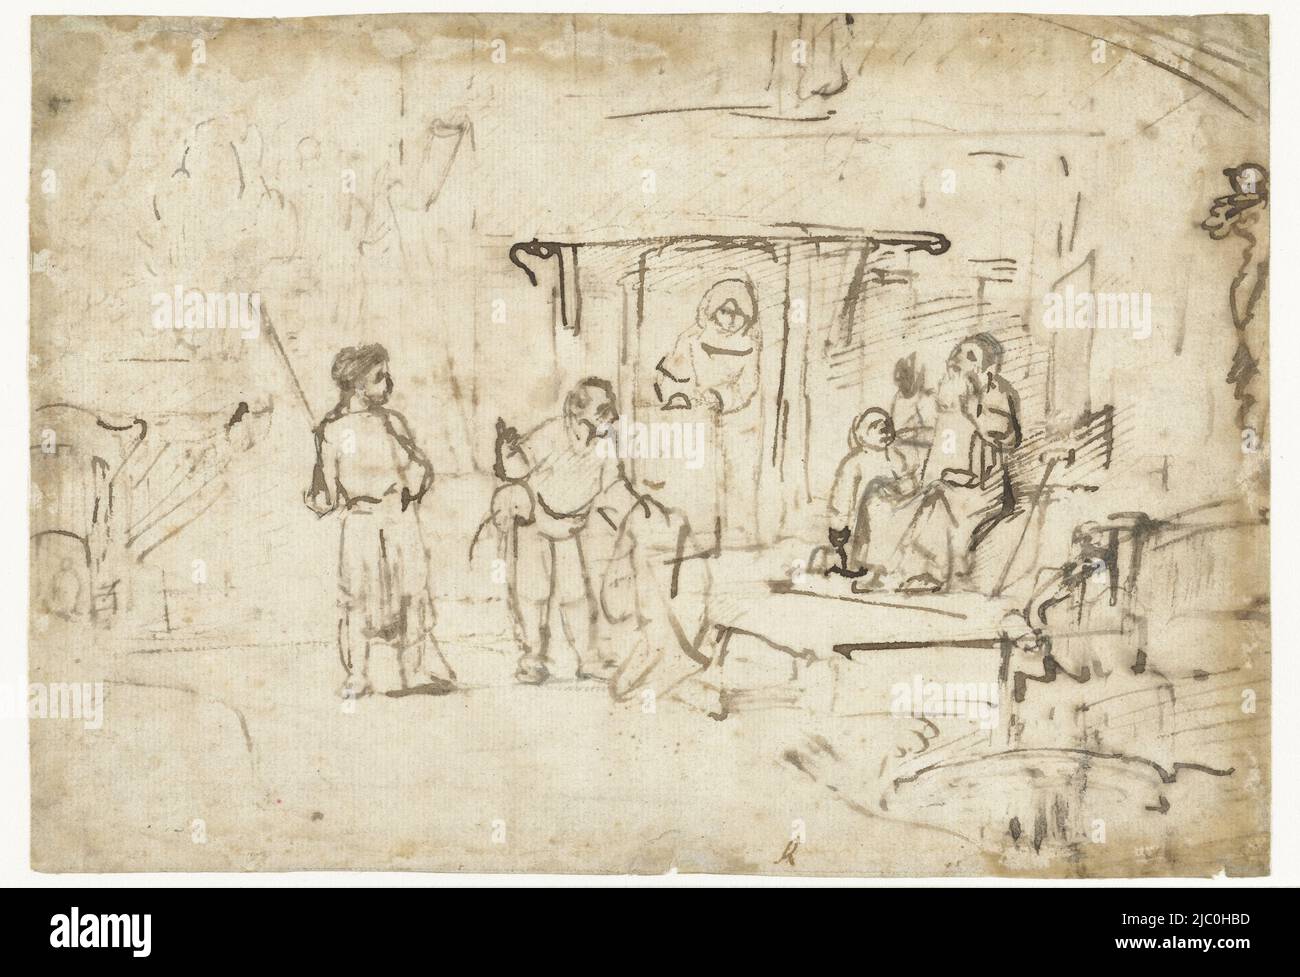 Jacob Being Shown Joseph's Blood-stained Coat, draughtsman: Carel van Savoyen, (attributed to), draughtsman: Rembrandt van Rijn, (rejected attribution), Amsterdam, c. 1650, paper, pen, brush, h 168 mm × w 241 mm Stock Photo